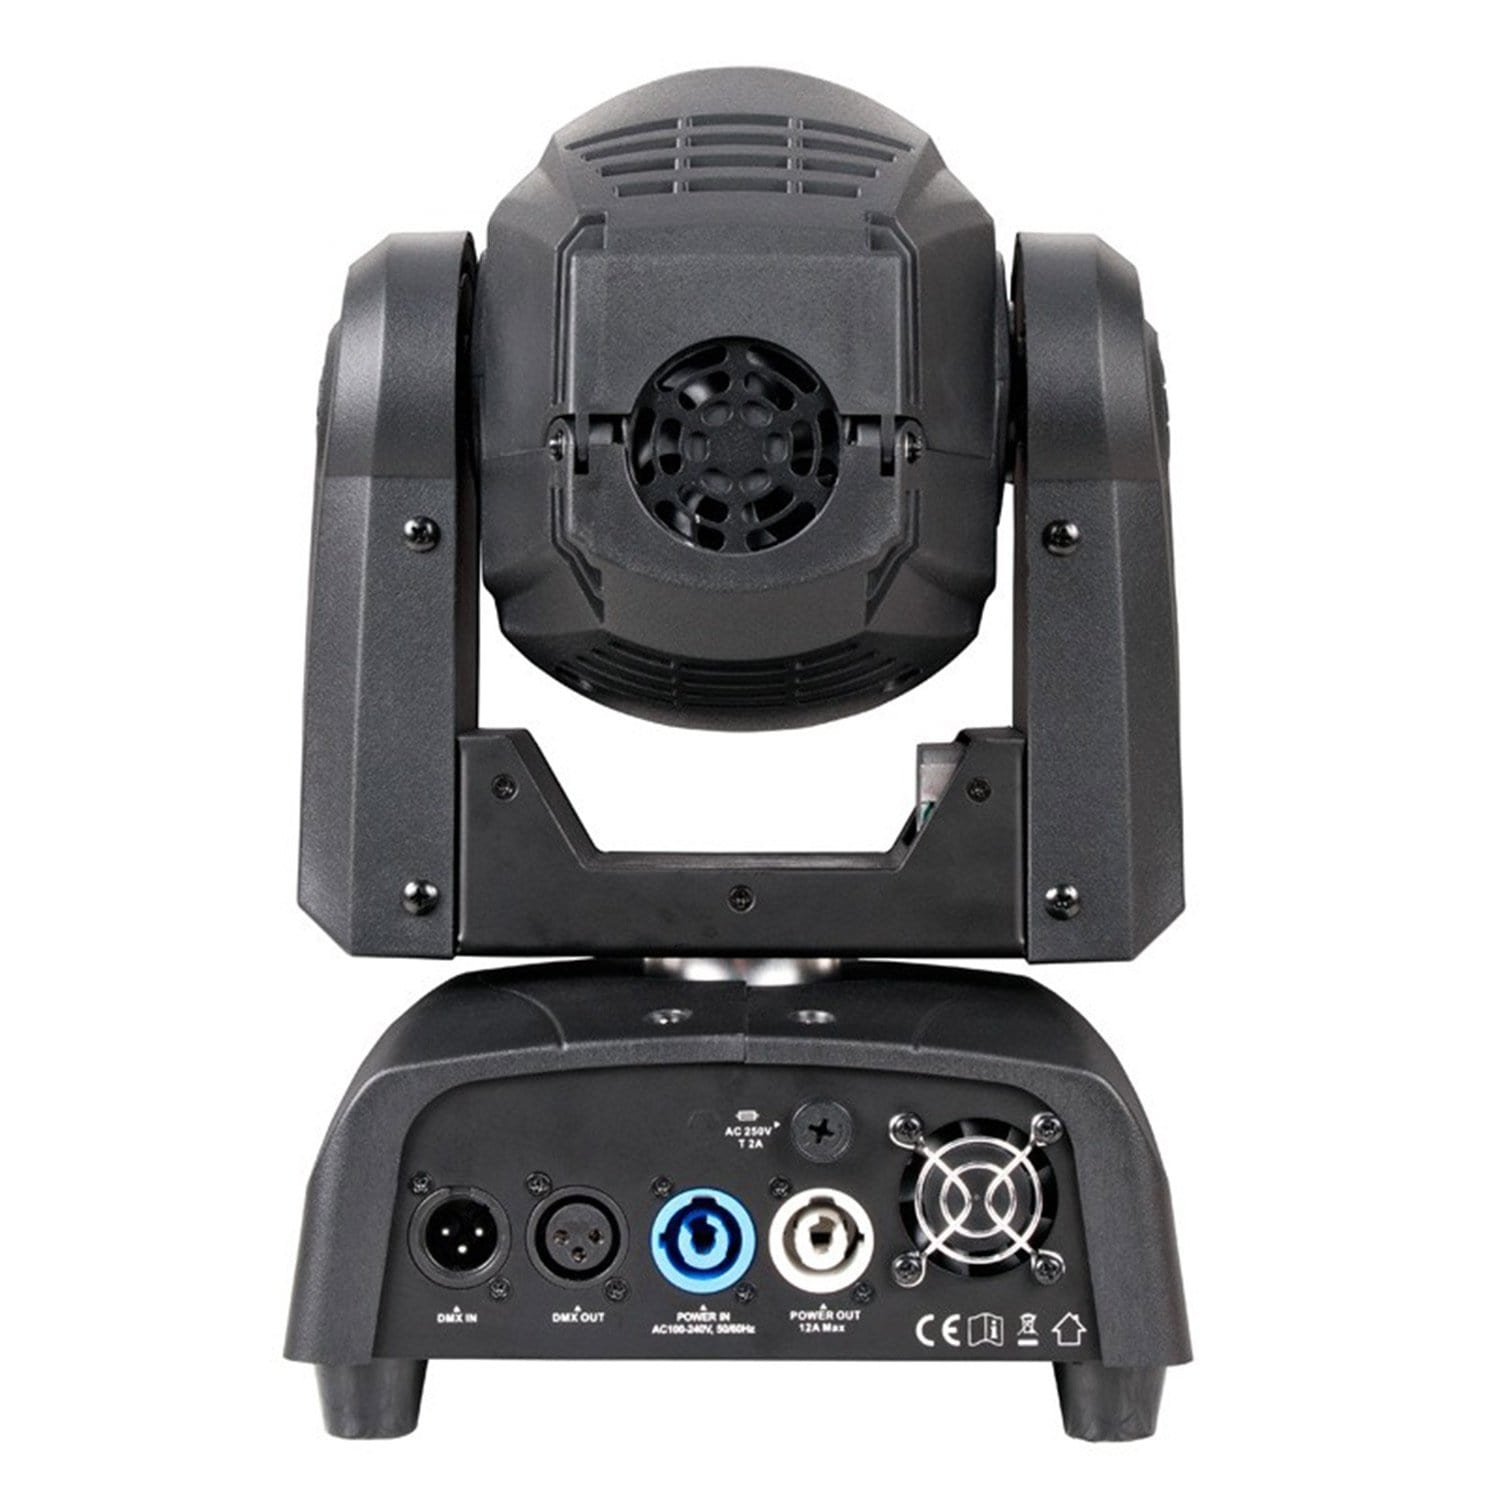 ADJ American DJ Focus Spot Two Moving Head 2-Pack with DMX Controller - PSSL ProSound and Stage Lighting